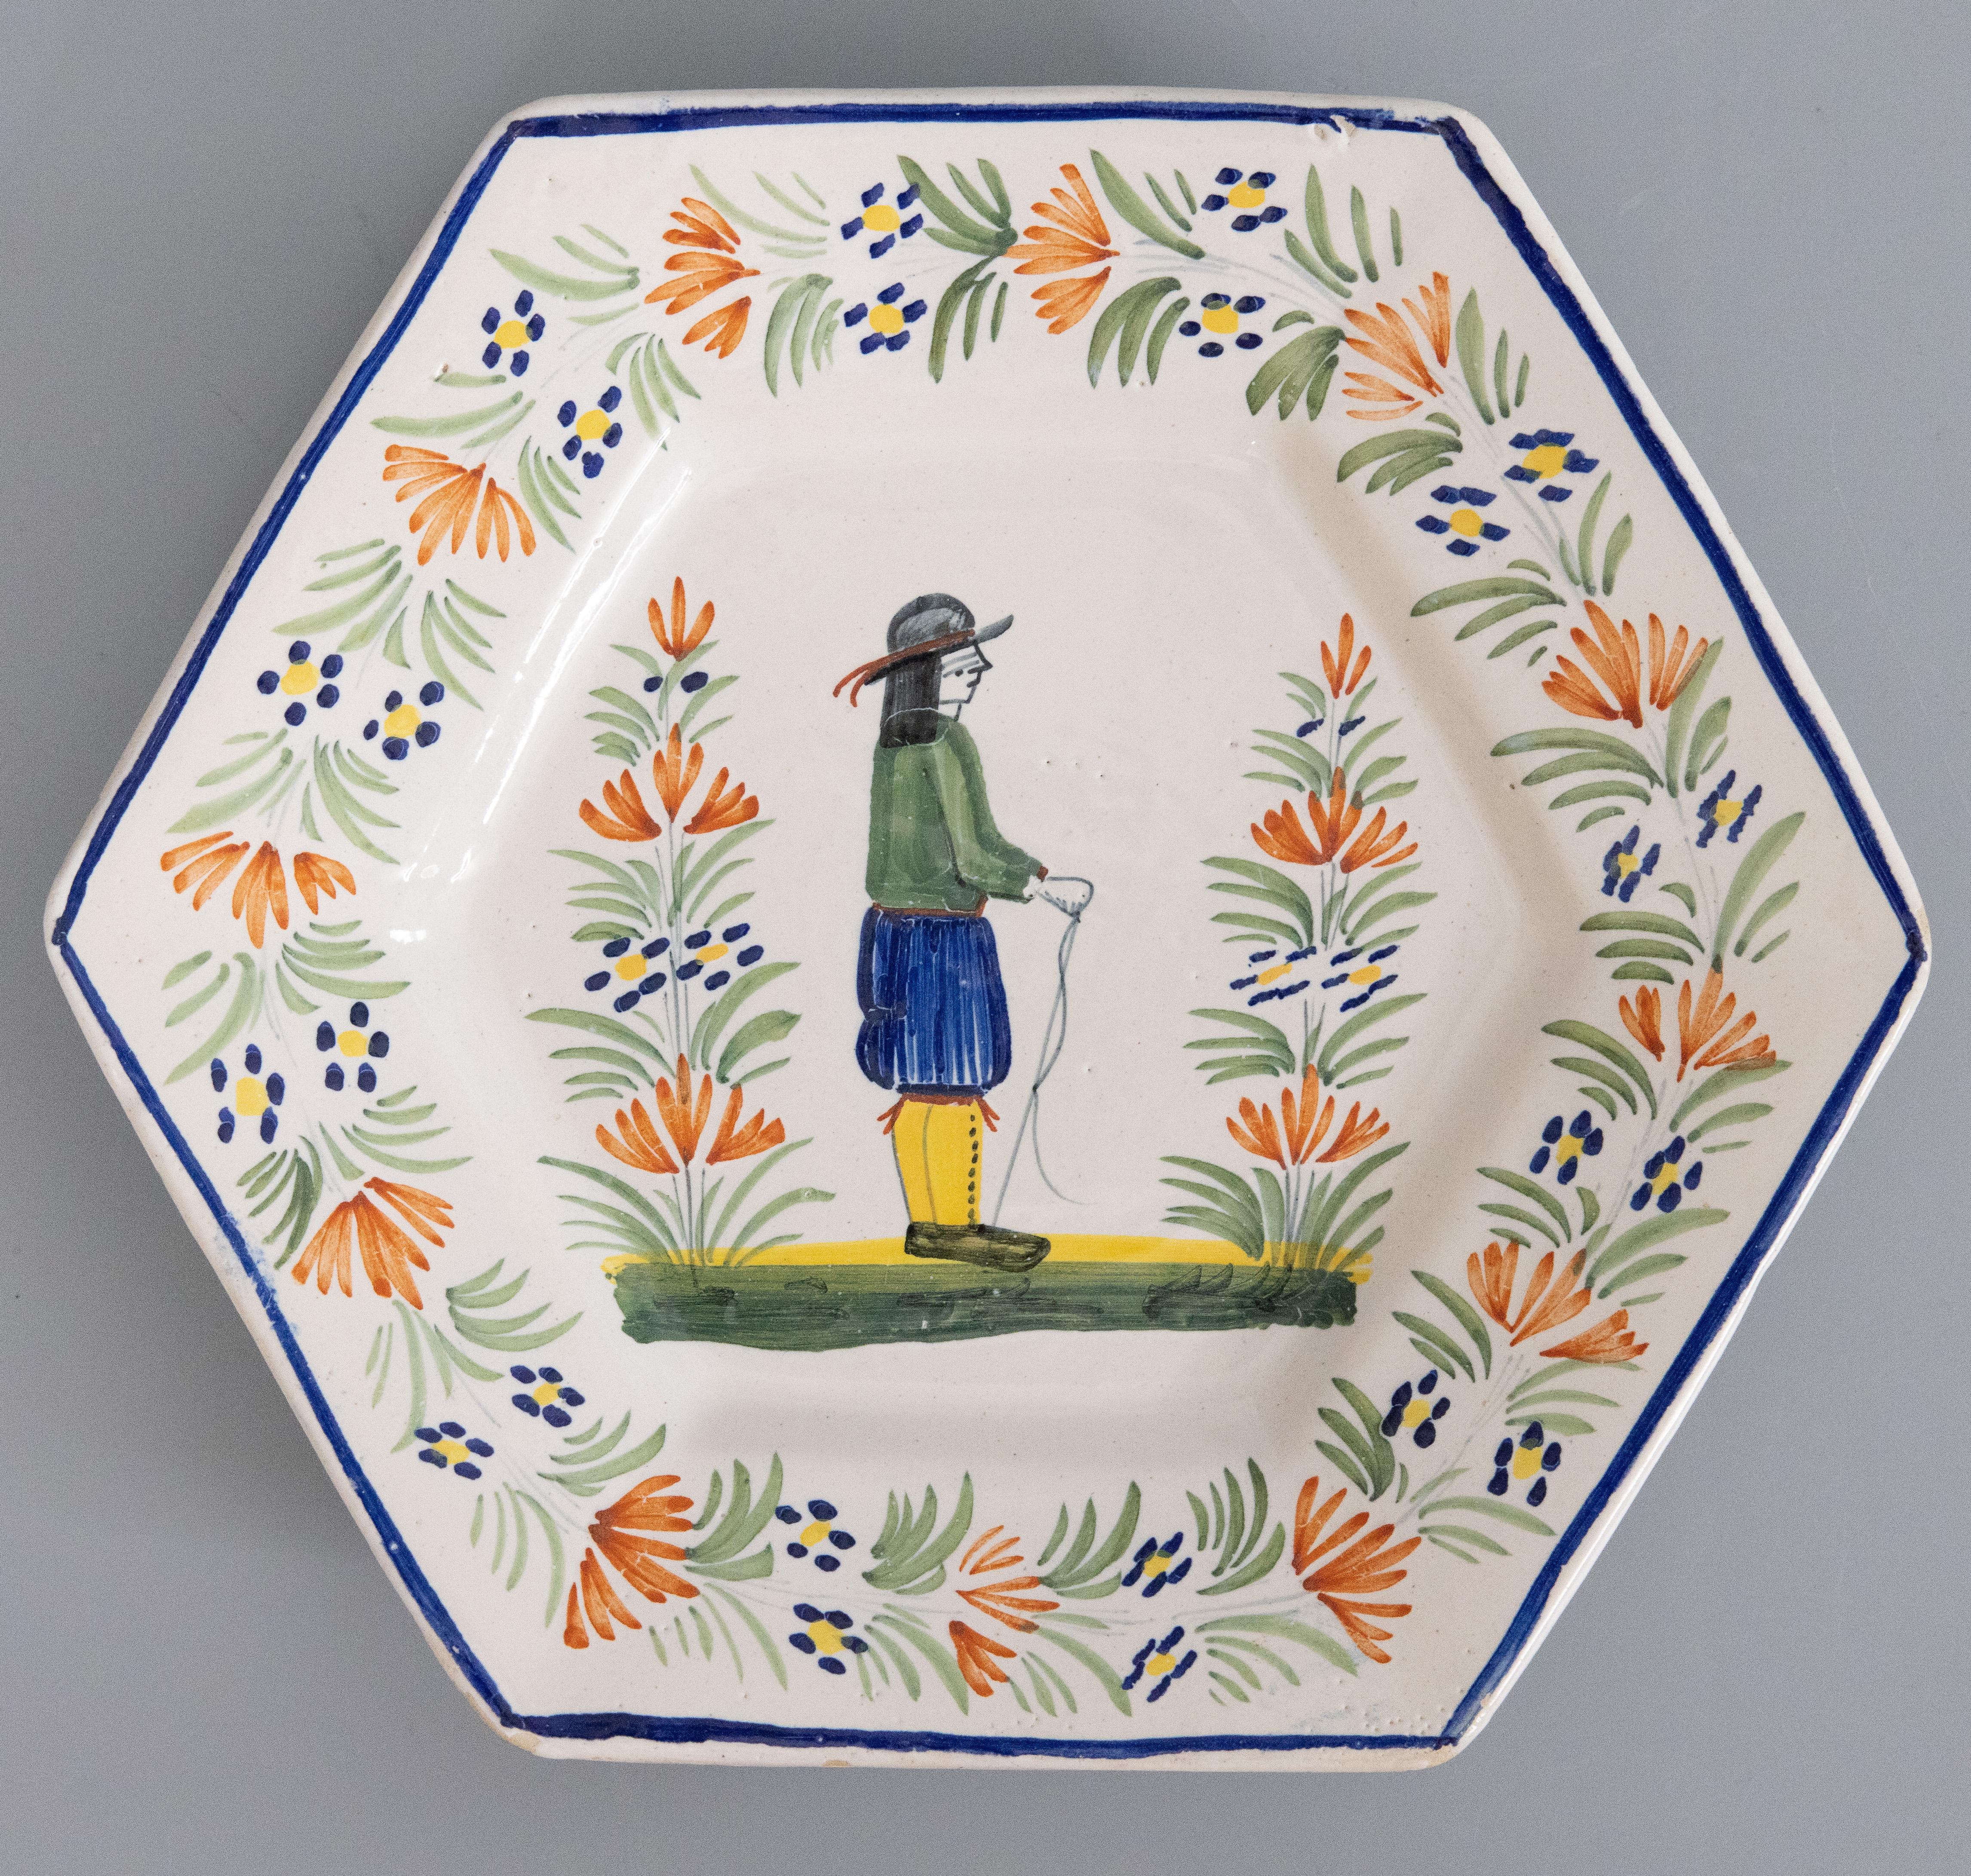 A charming pair of antique French faience Quimper plates in a rare hexagonal shape, circa 1900. Unmarked. These collectible hand painted plates feature the classic Breton man and woman in vibrant colors. They would look lovely displayed on a shelf